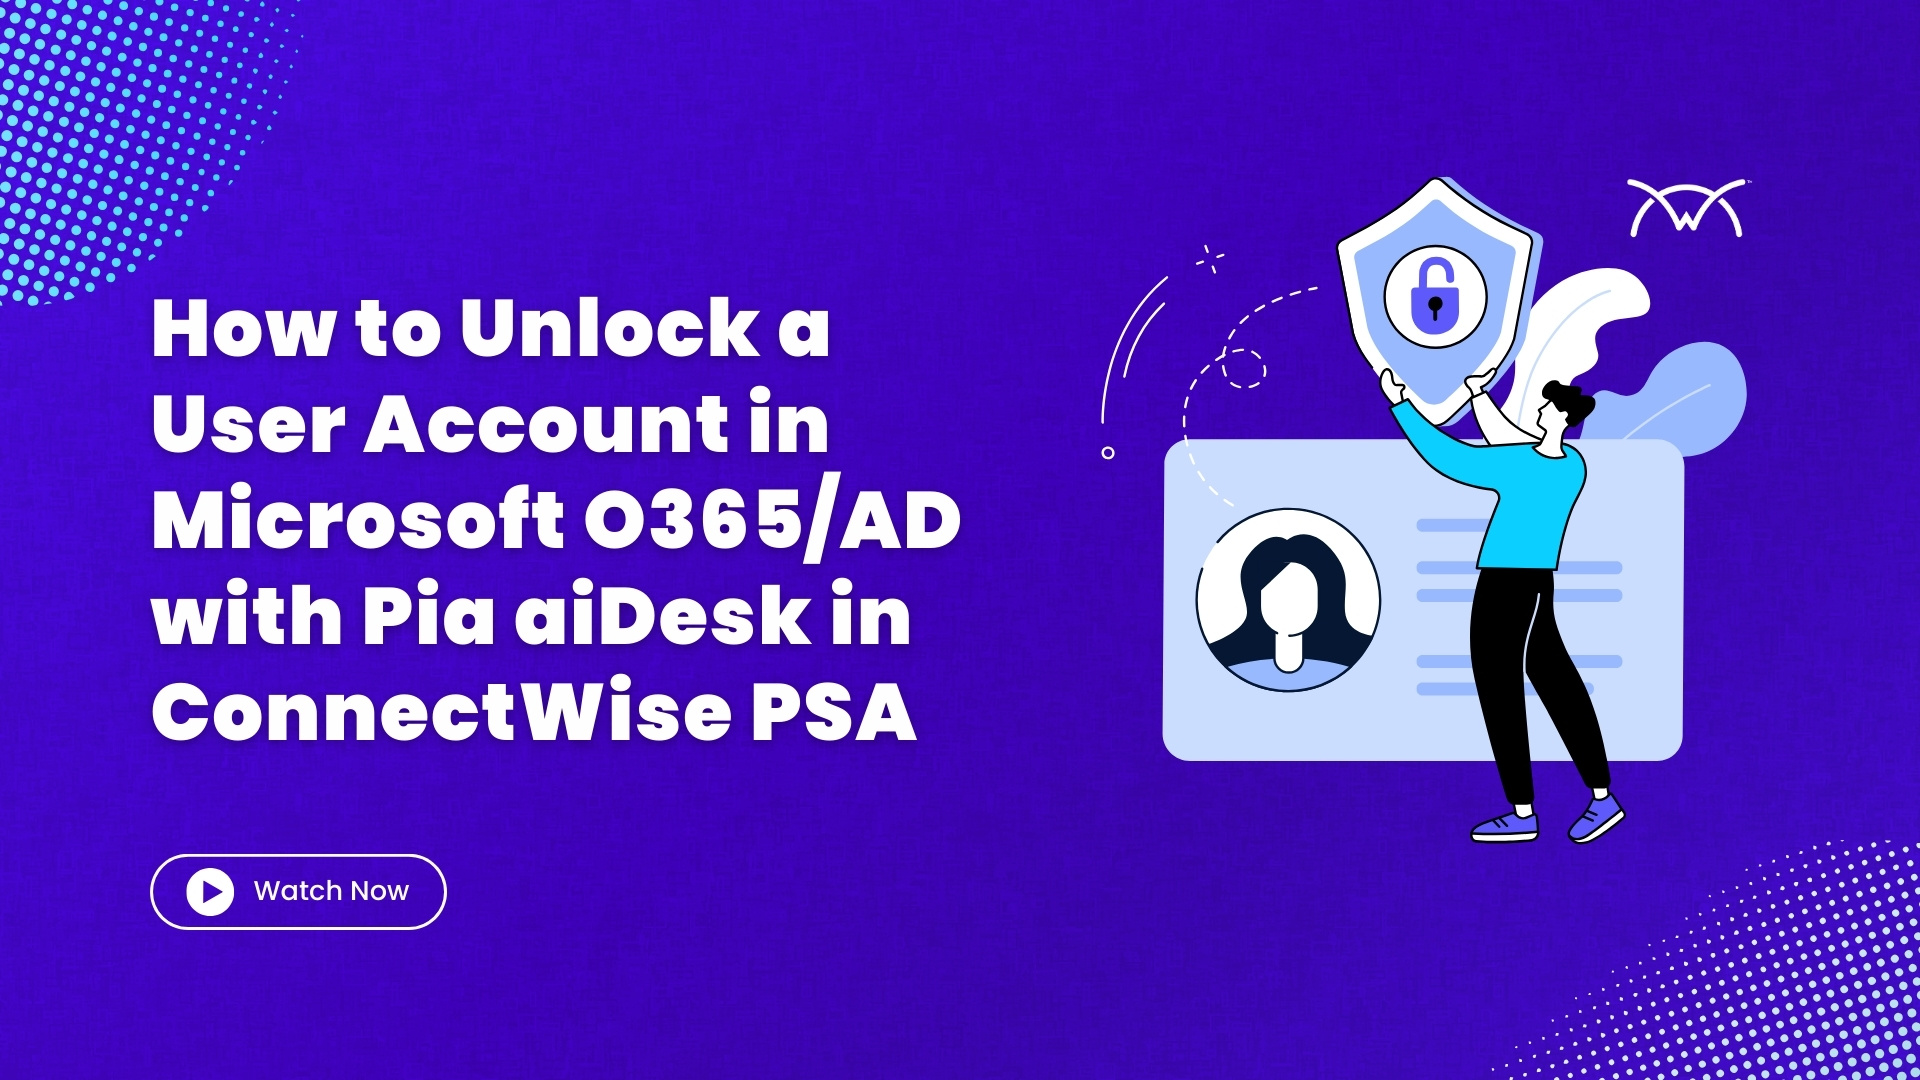 How to Unlock a User Account in Microsoft O365AD with Pia aiDesk in ConnectWise PSA